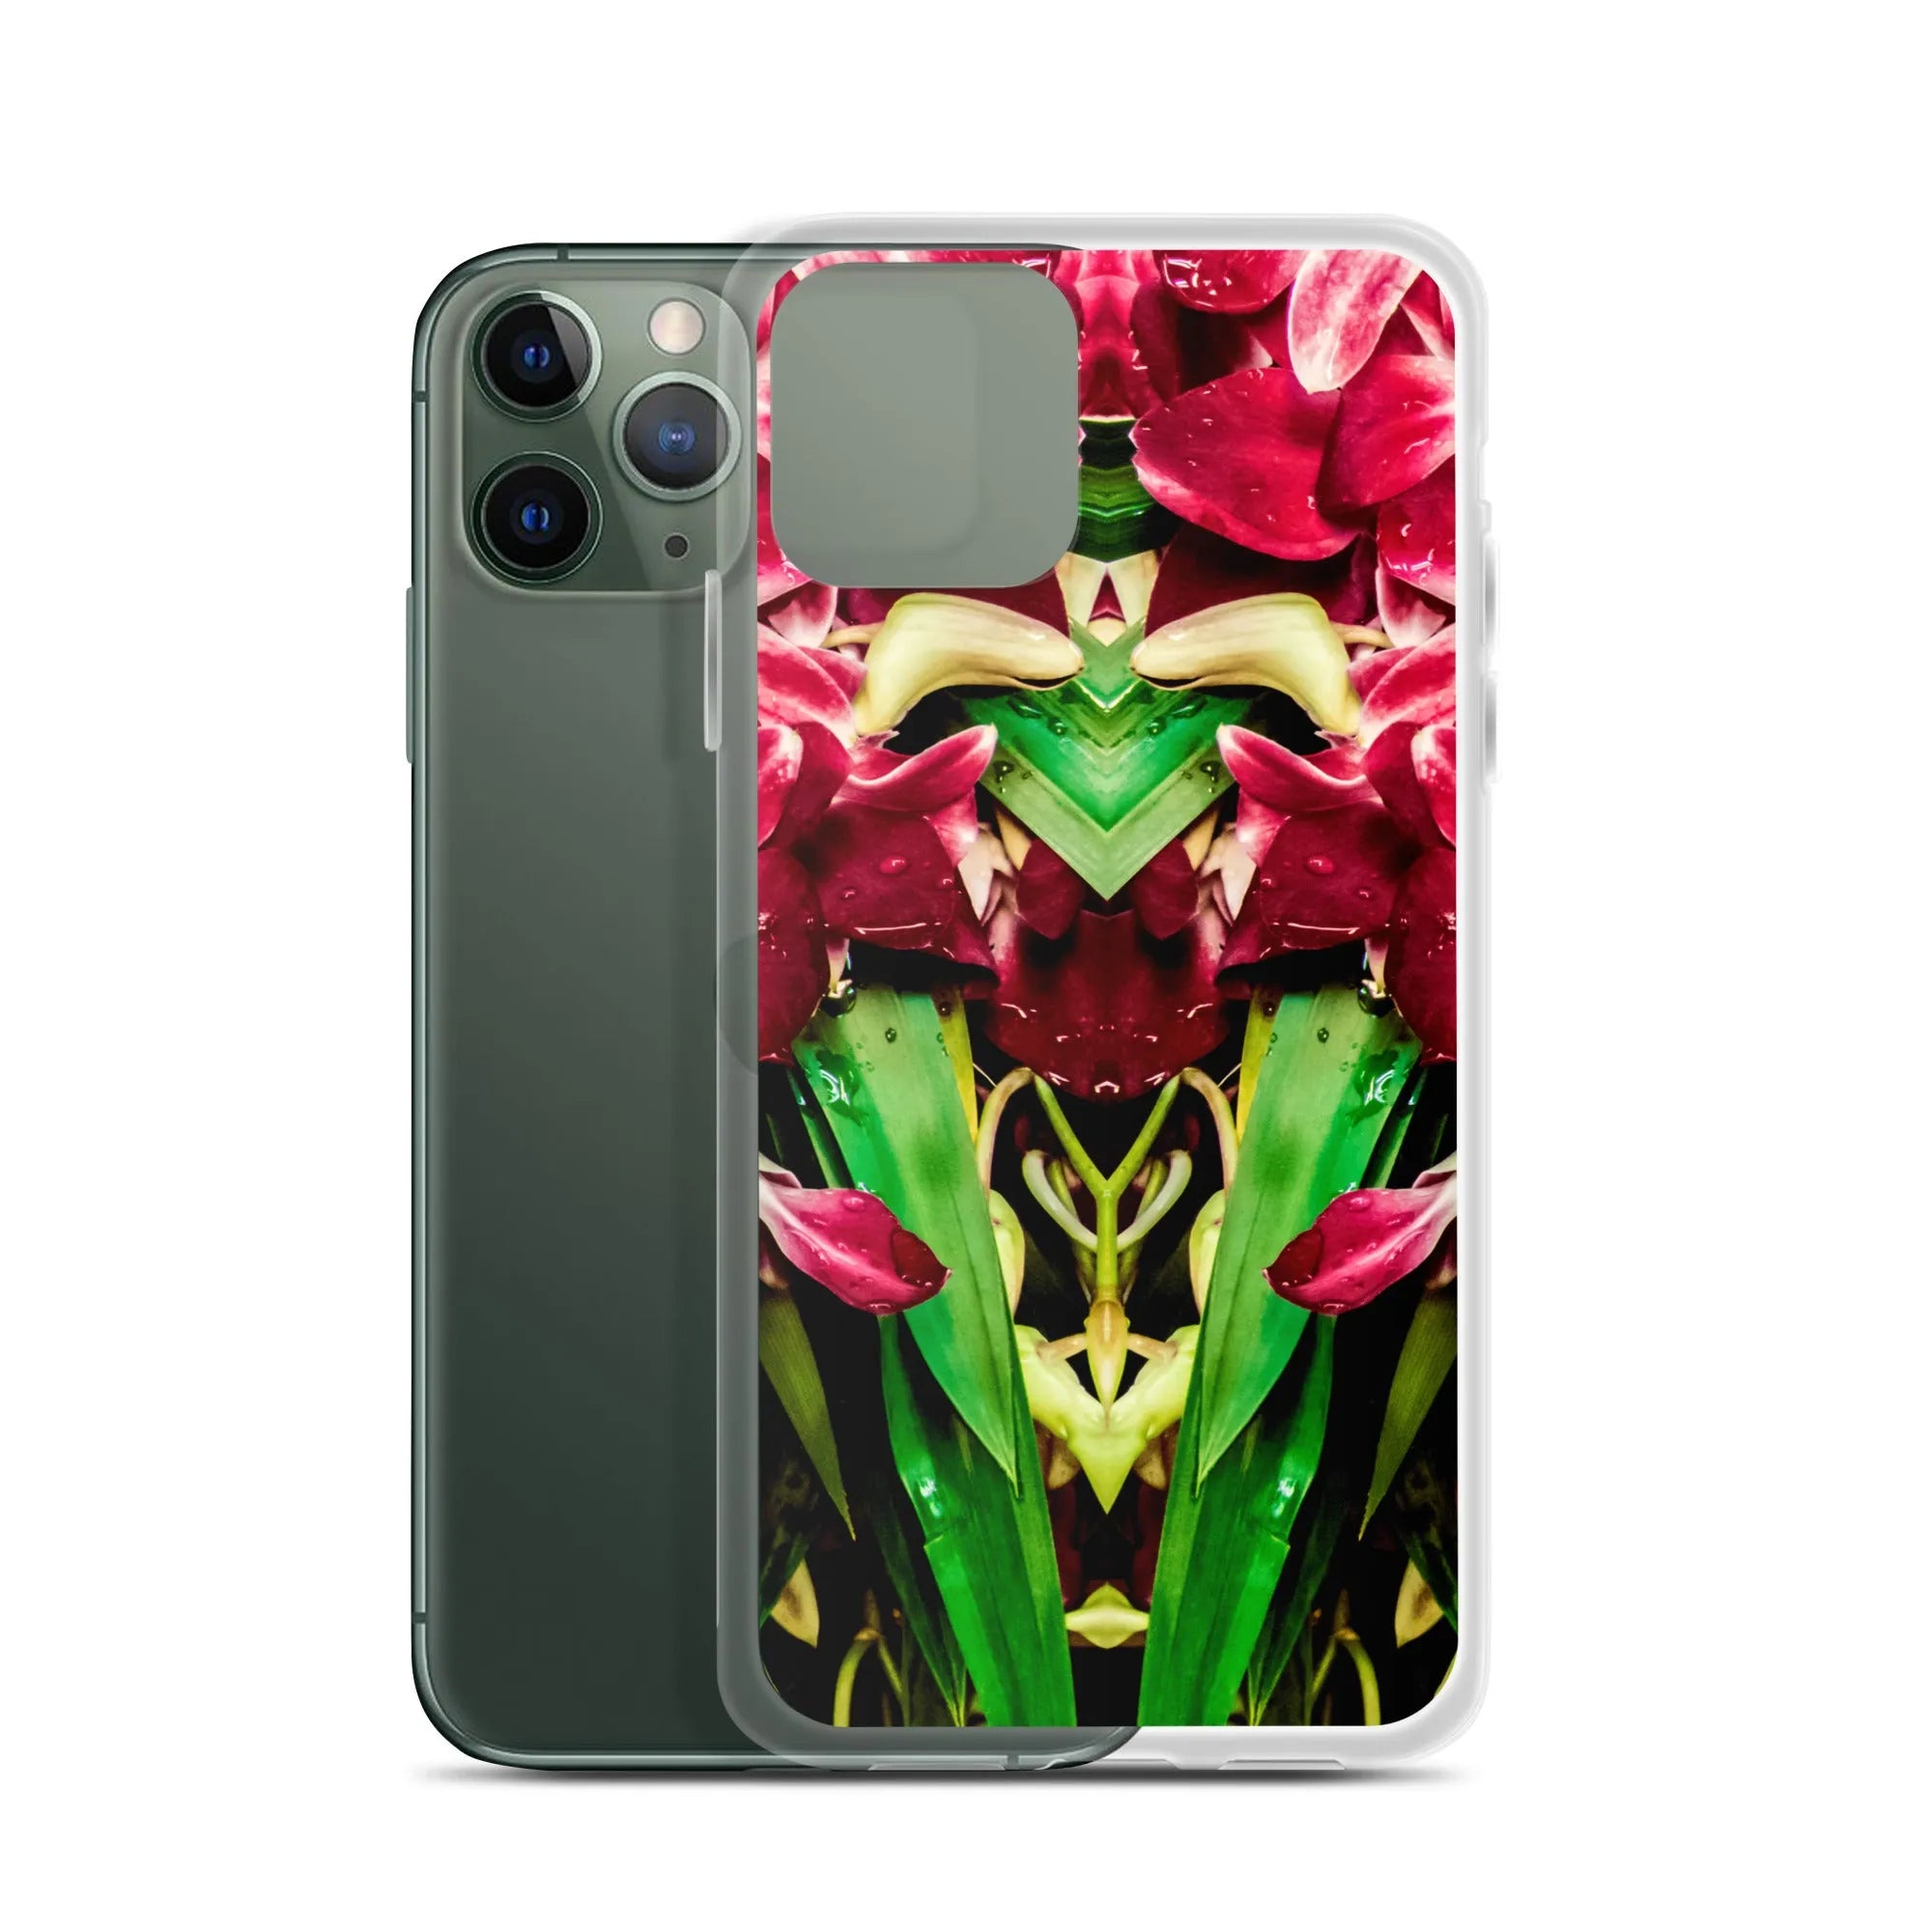 Ruby Reds² Floral Iphone Case - Iphone 11 Pro - Mobile Phone Cases - Aesthetic Art